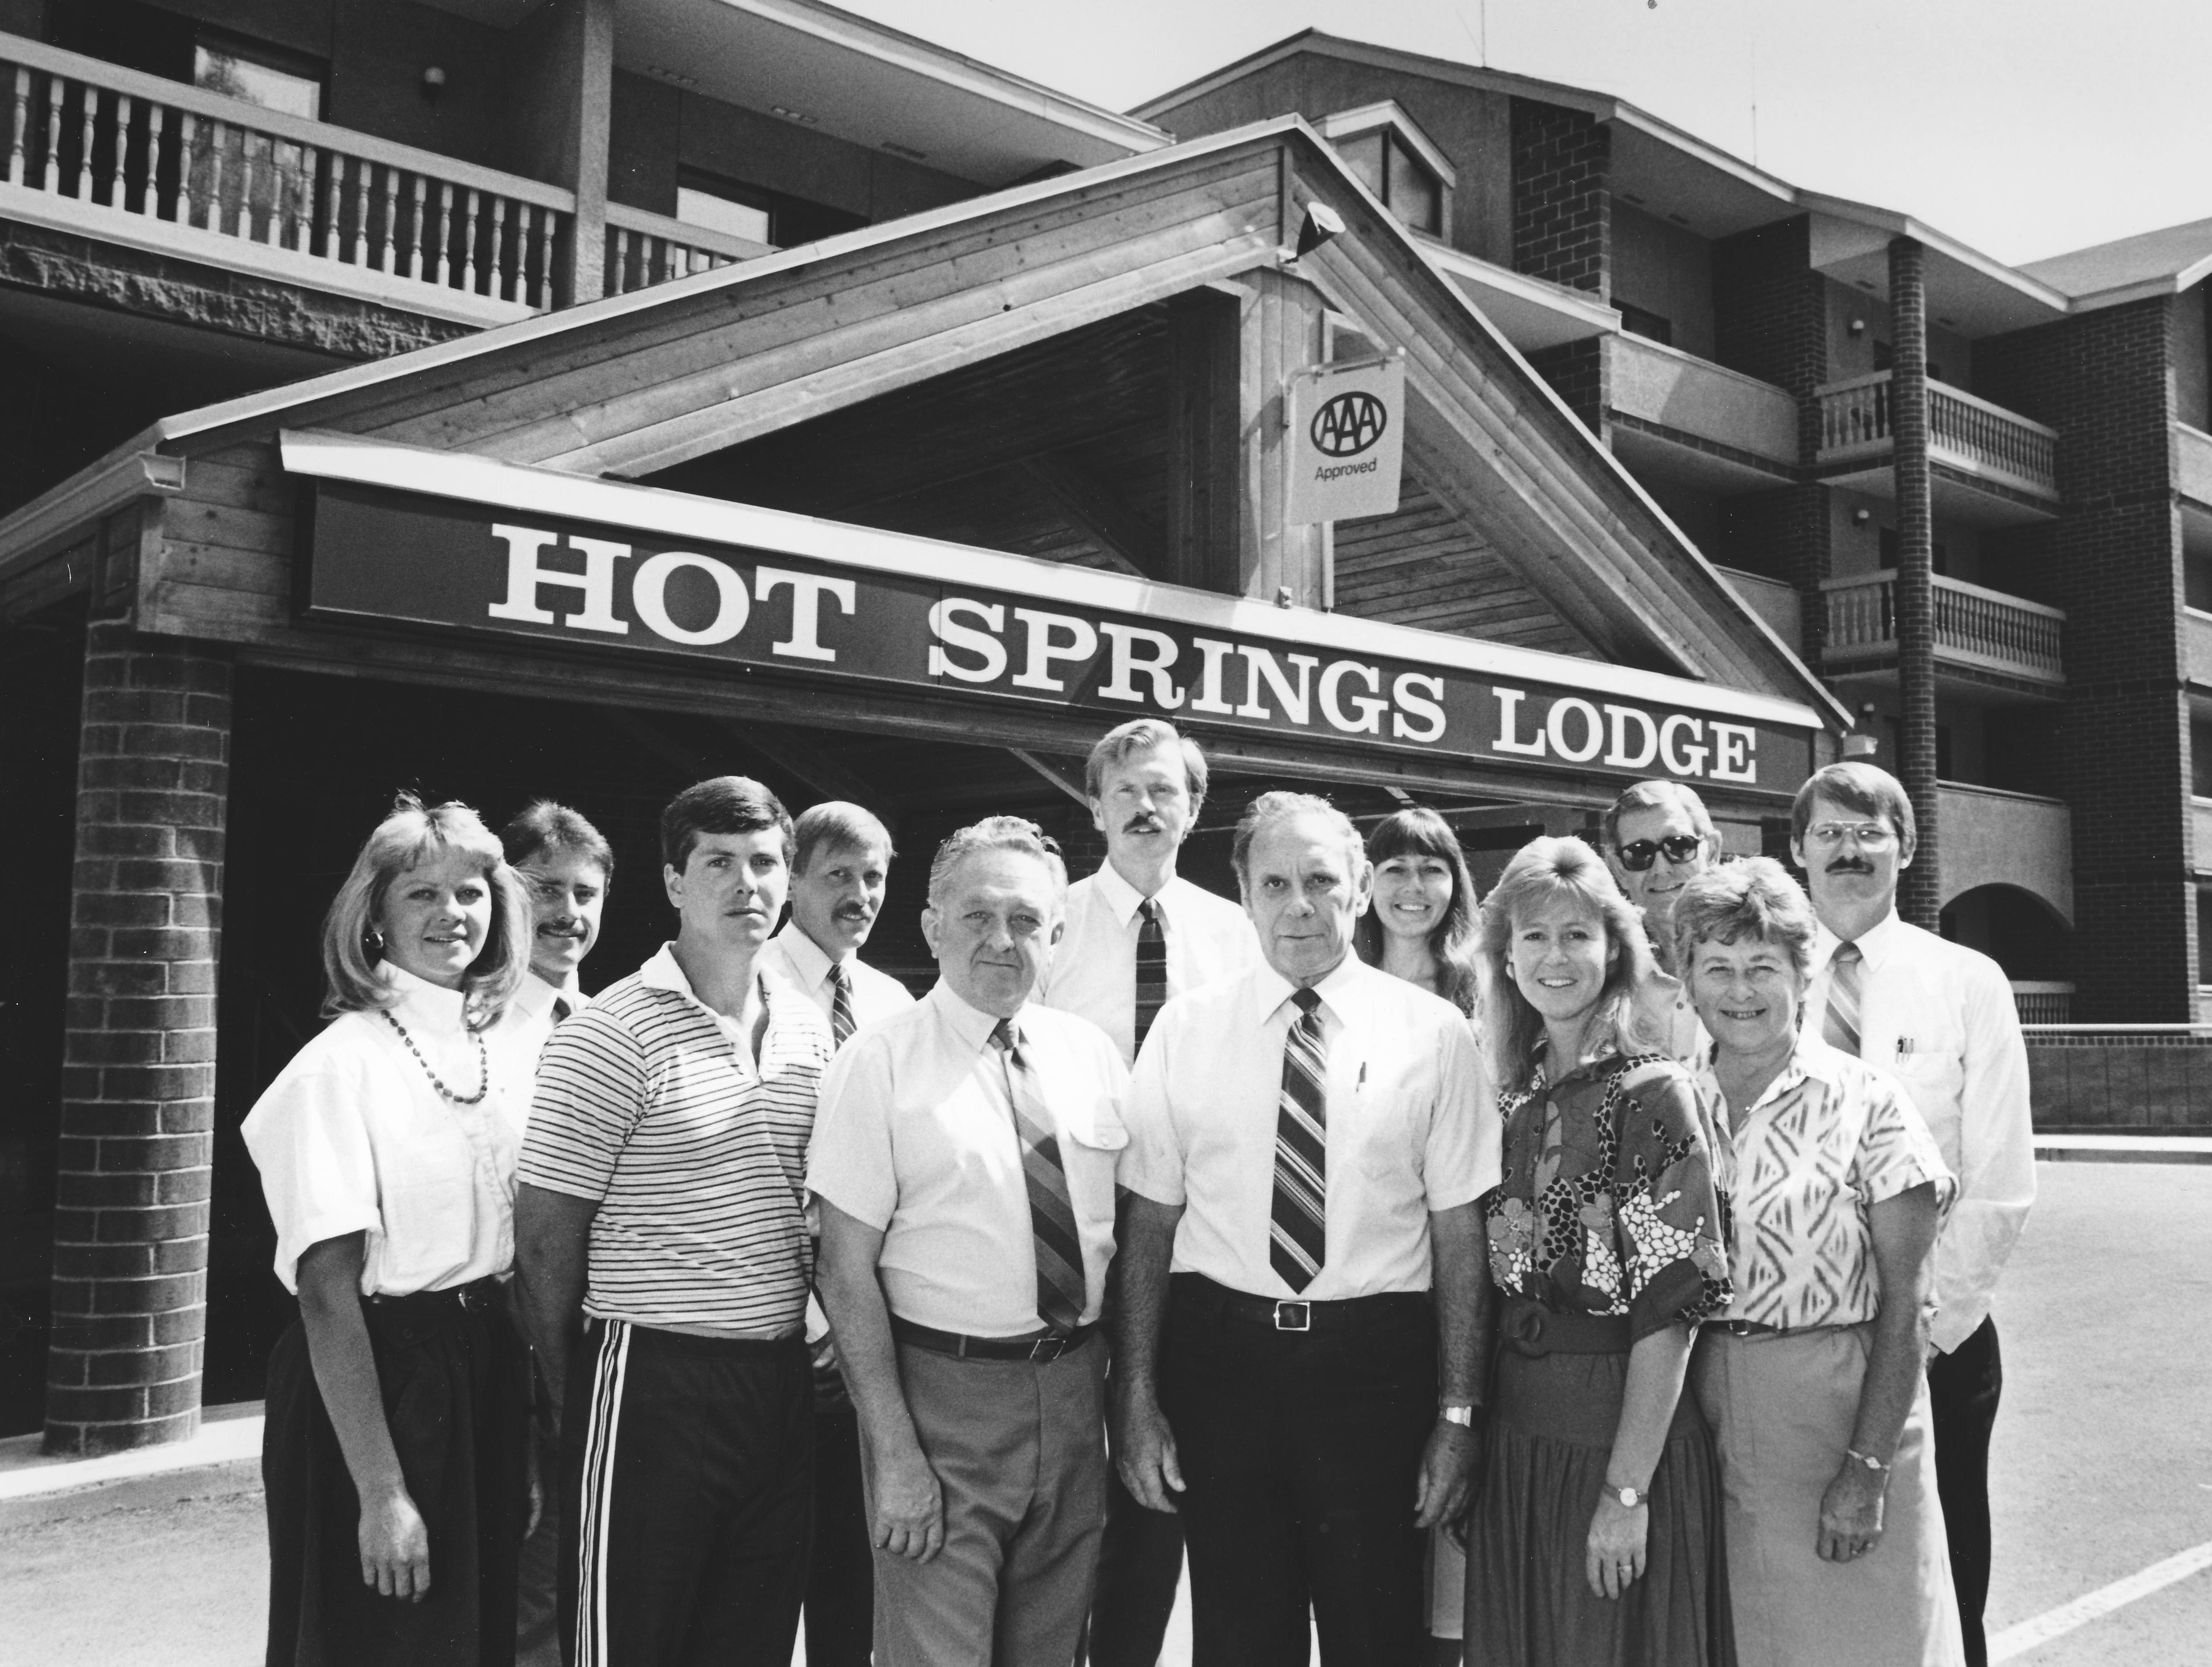 opening of the Glenwood Hot Springs Lodge in 1986